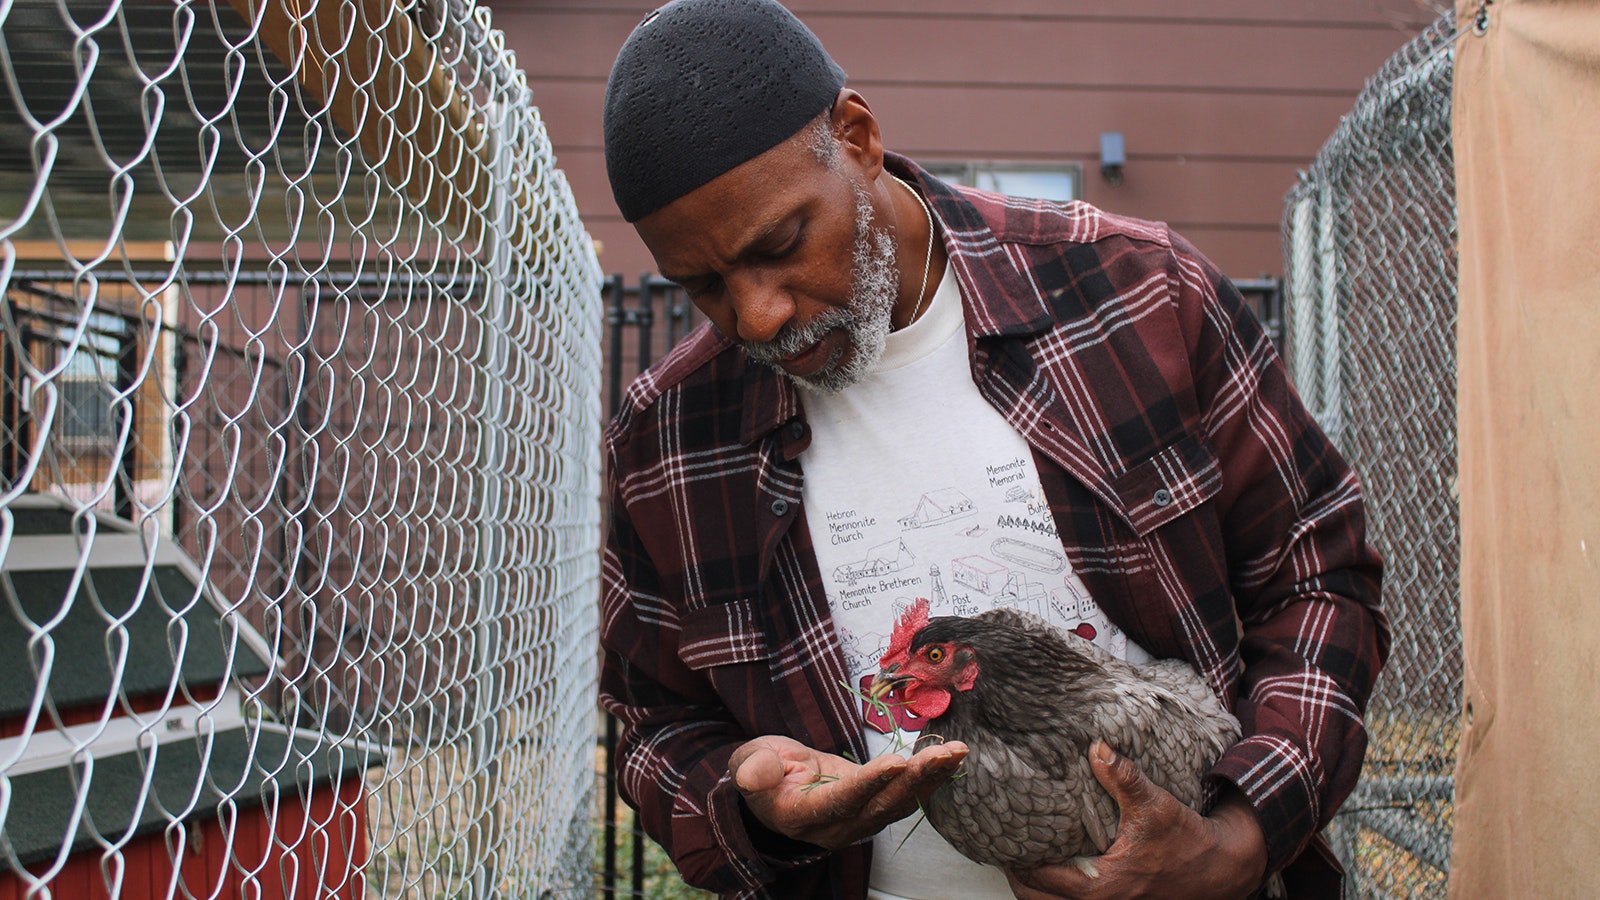 Along with building up his handyman business, Clarence Fisher also finds peace in raising his own chickens.